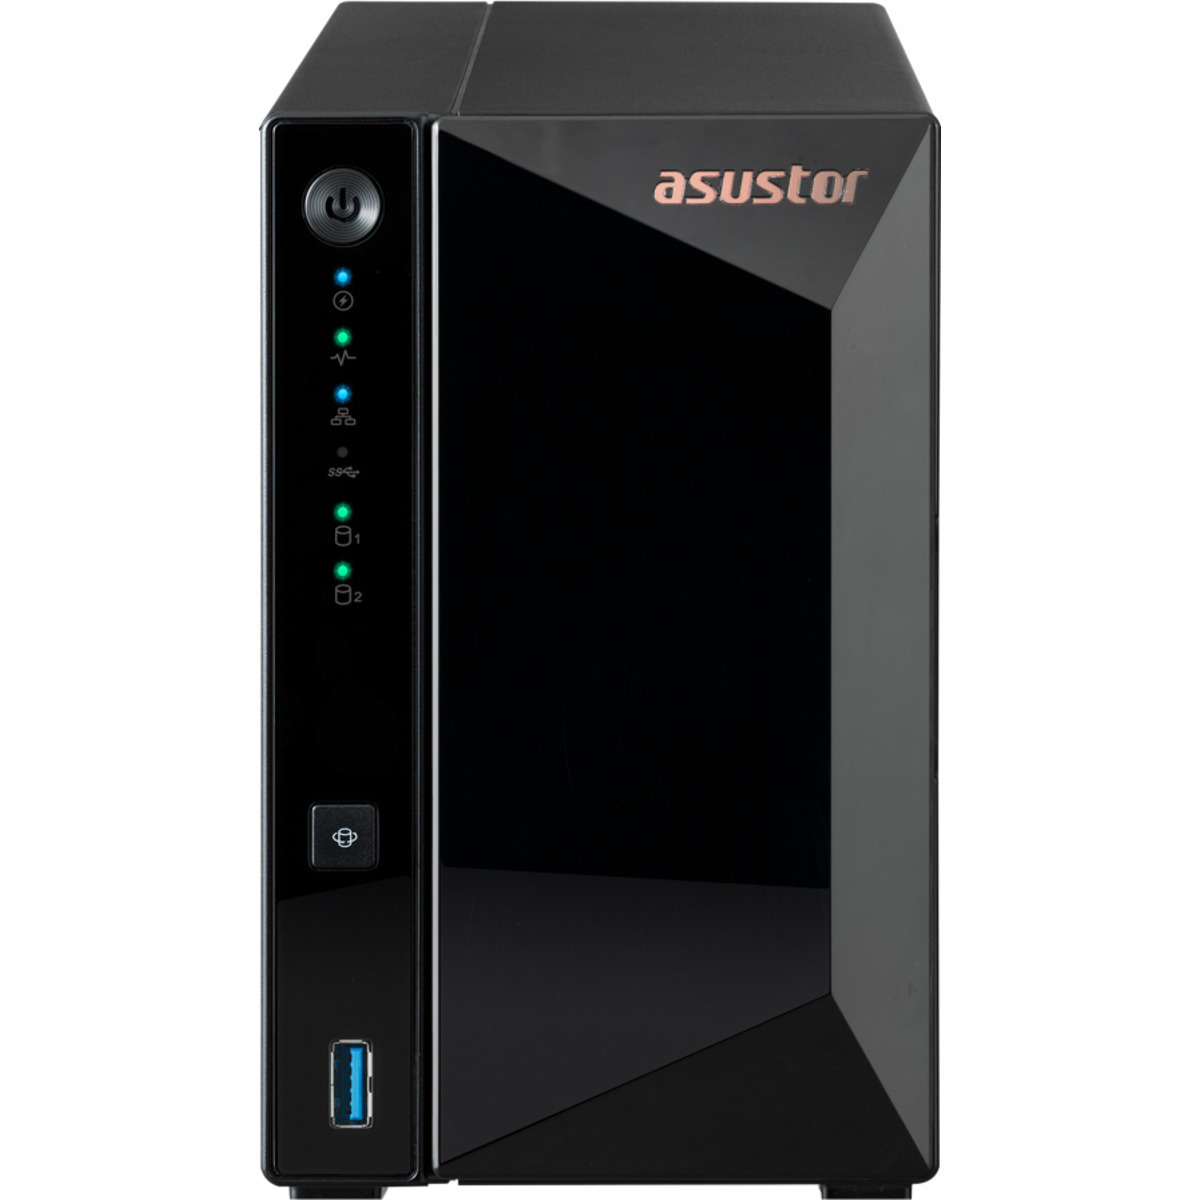 ASUSTOR DRIVESTOR 2 Pro AS3302T 16tb 2-Bay Desktop Personal / Basic Home / Small Office NAS - Network Attached Storage Device 2x8tb Western Digital Red Plus WD80EFPX 3.5 7200rpm SATA 6Gb/s HDD NAS Class Drives Installed - Burn-In Tested DRIVESTOR 2 Pro AS3302T